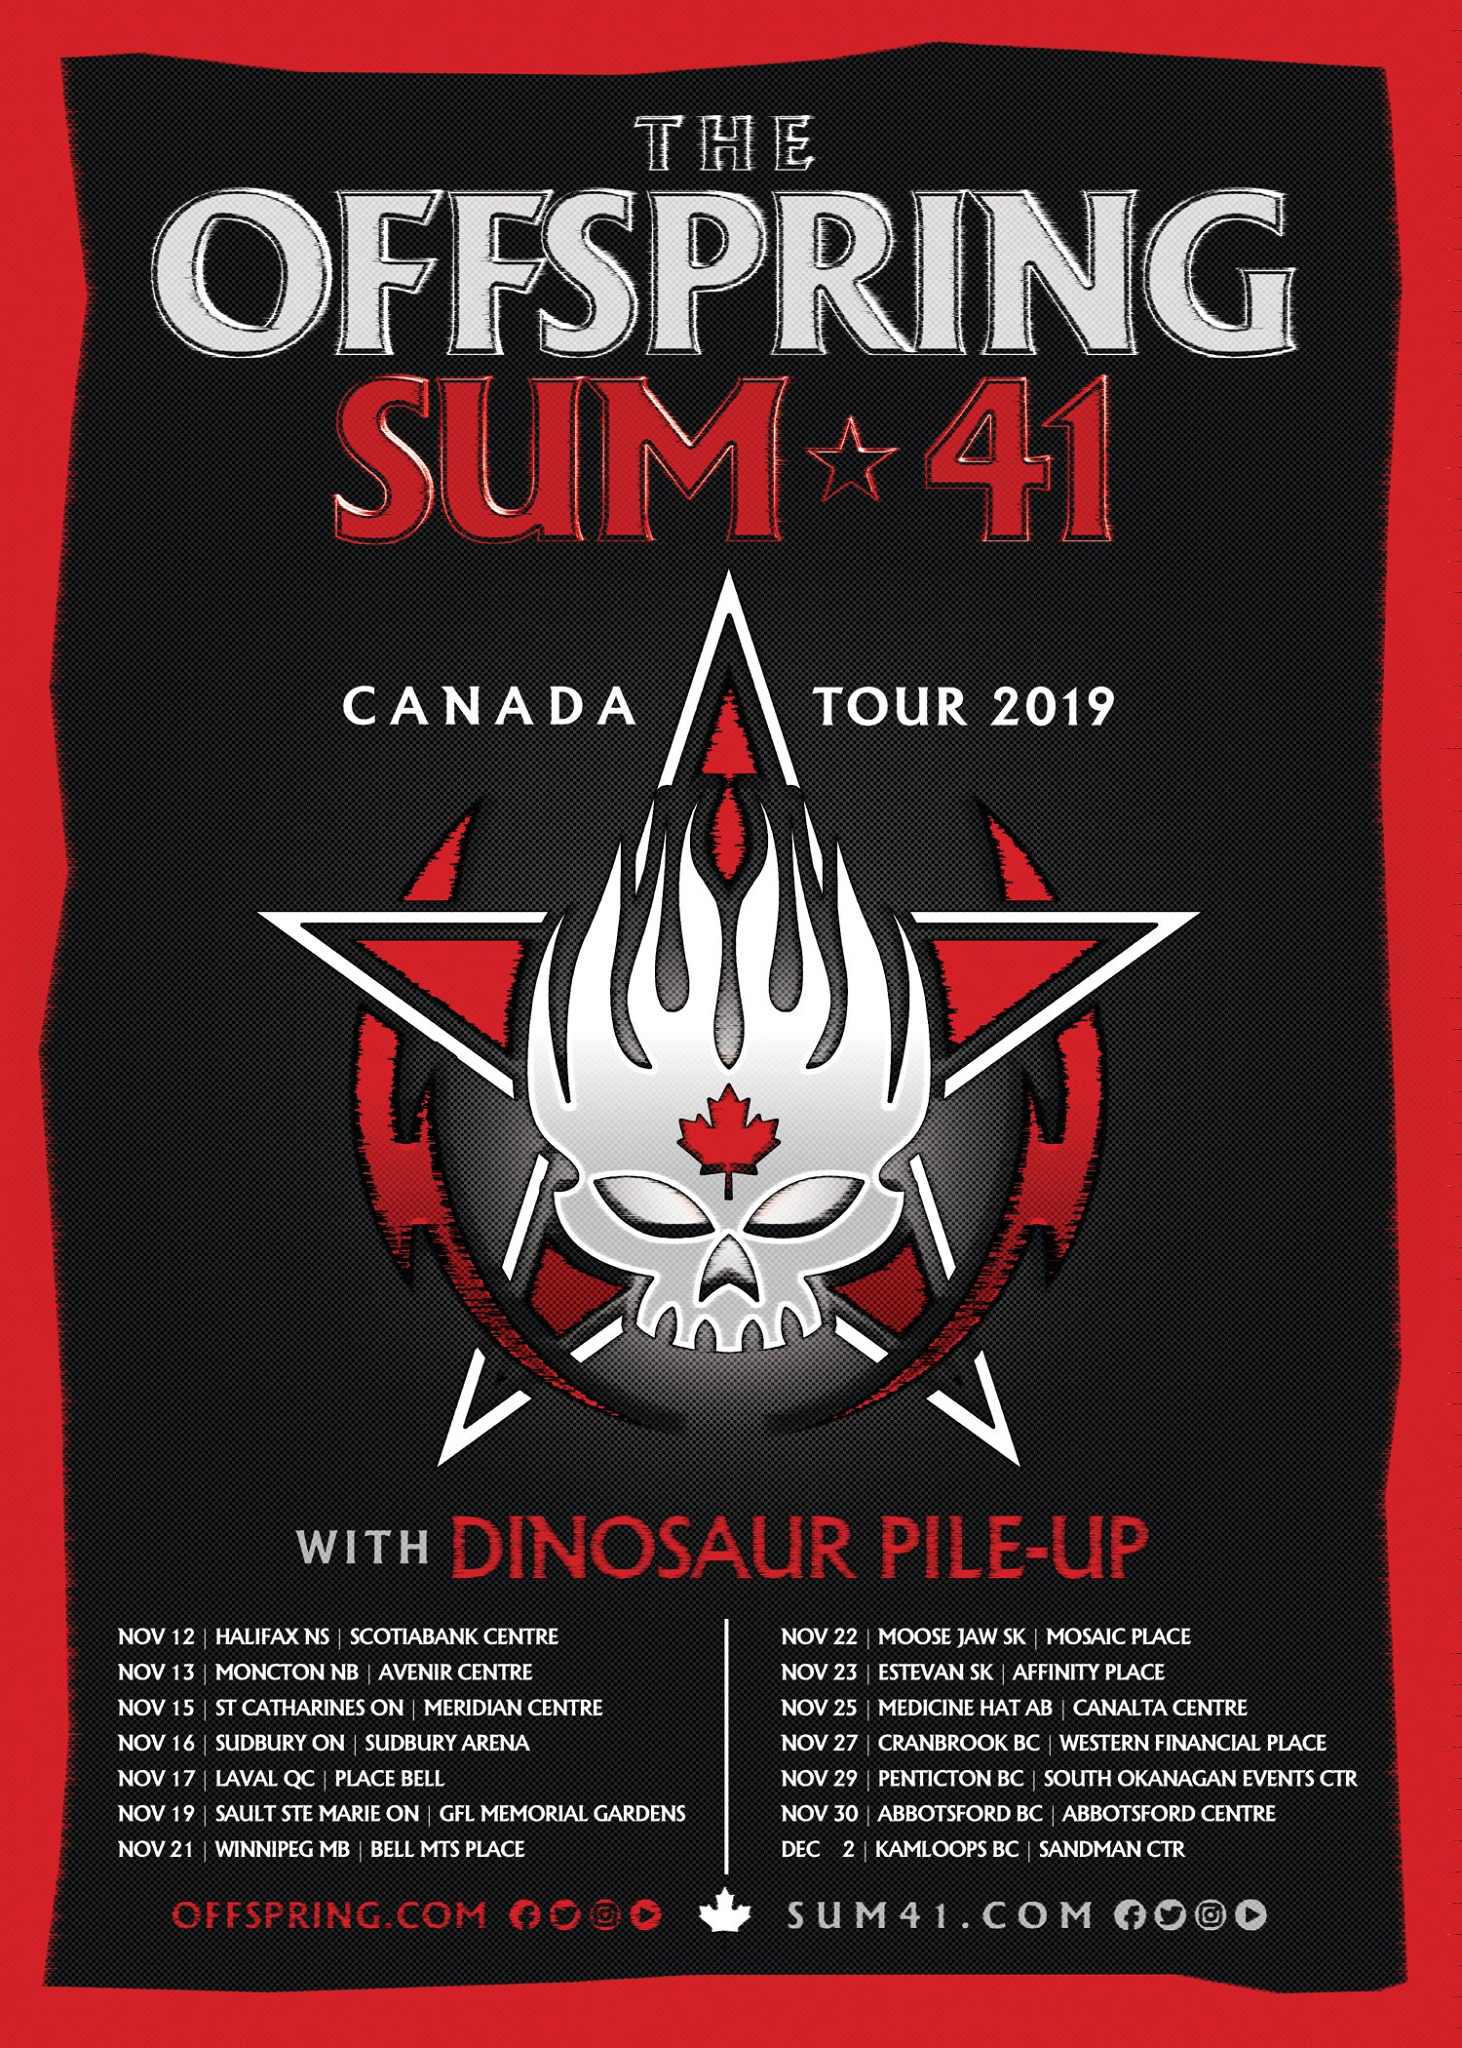 The Offspring and Sum 41